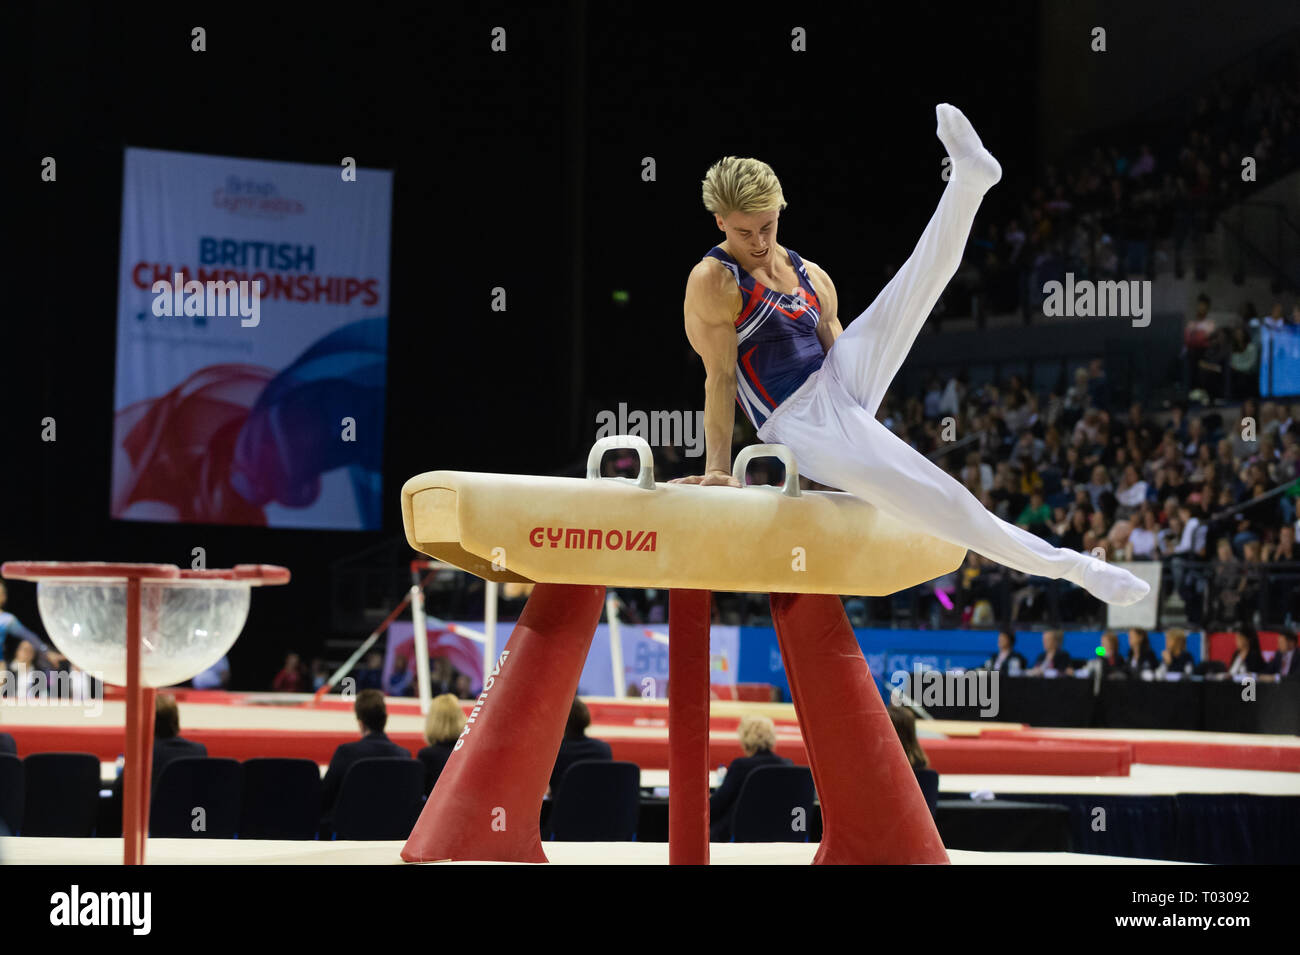 Liverpool, UK. 17th March 2019. Jay Thompson of South Essex competing at the Men’s and Women’s Artistic British Championships 2019, M&S Bank Arena, Liverpool, UK. Stock Photo